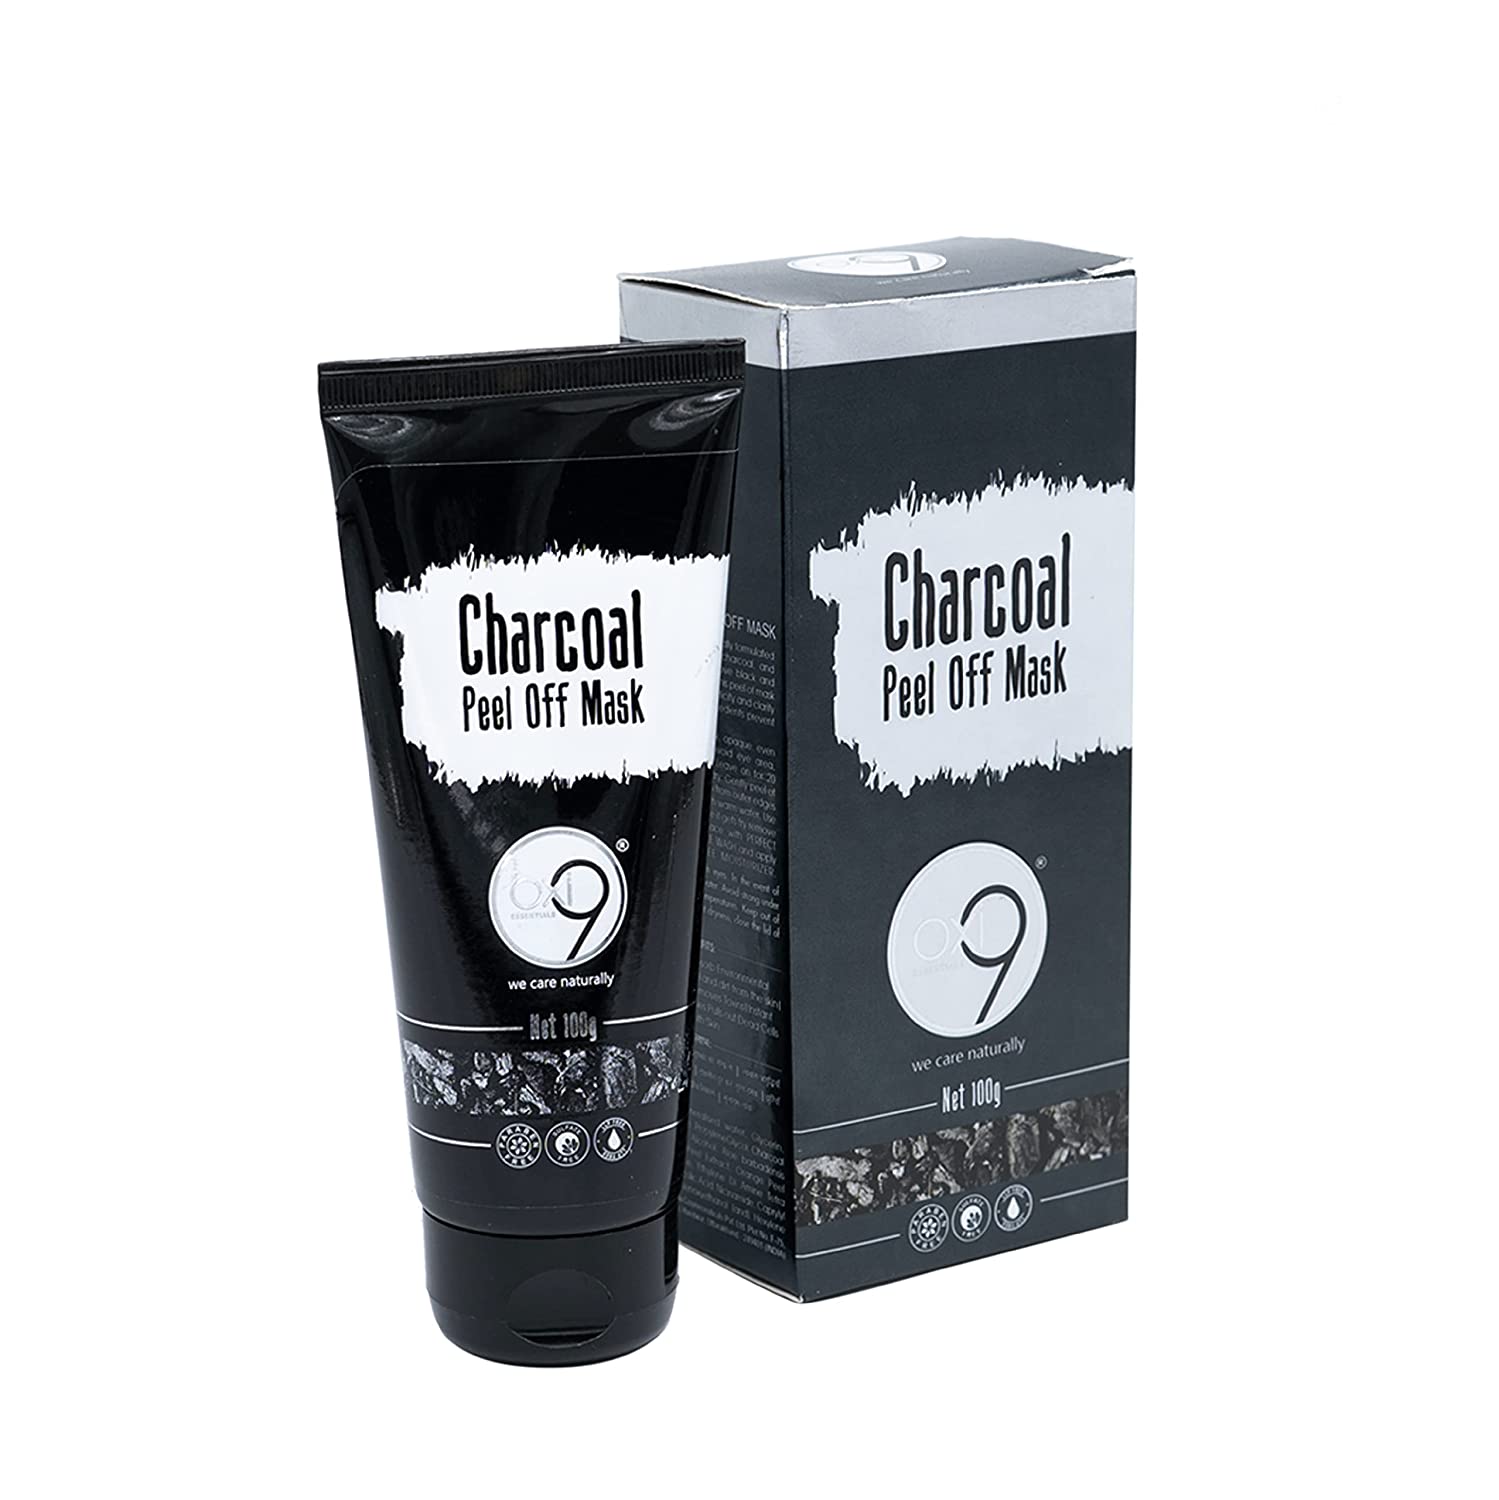 Charcoal Peel Off Mask- 100gm | Paraben Free